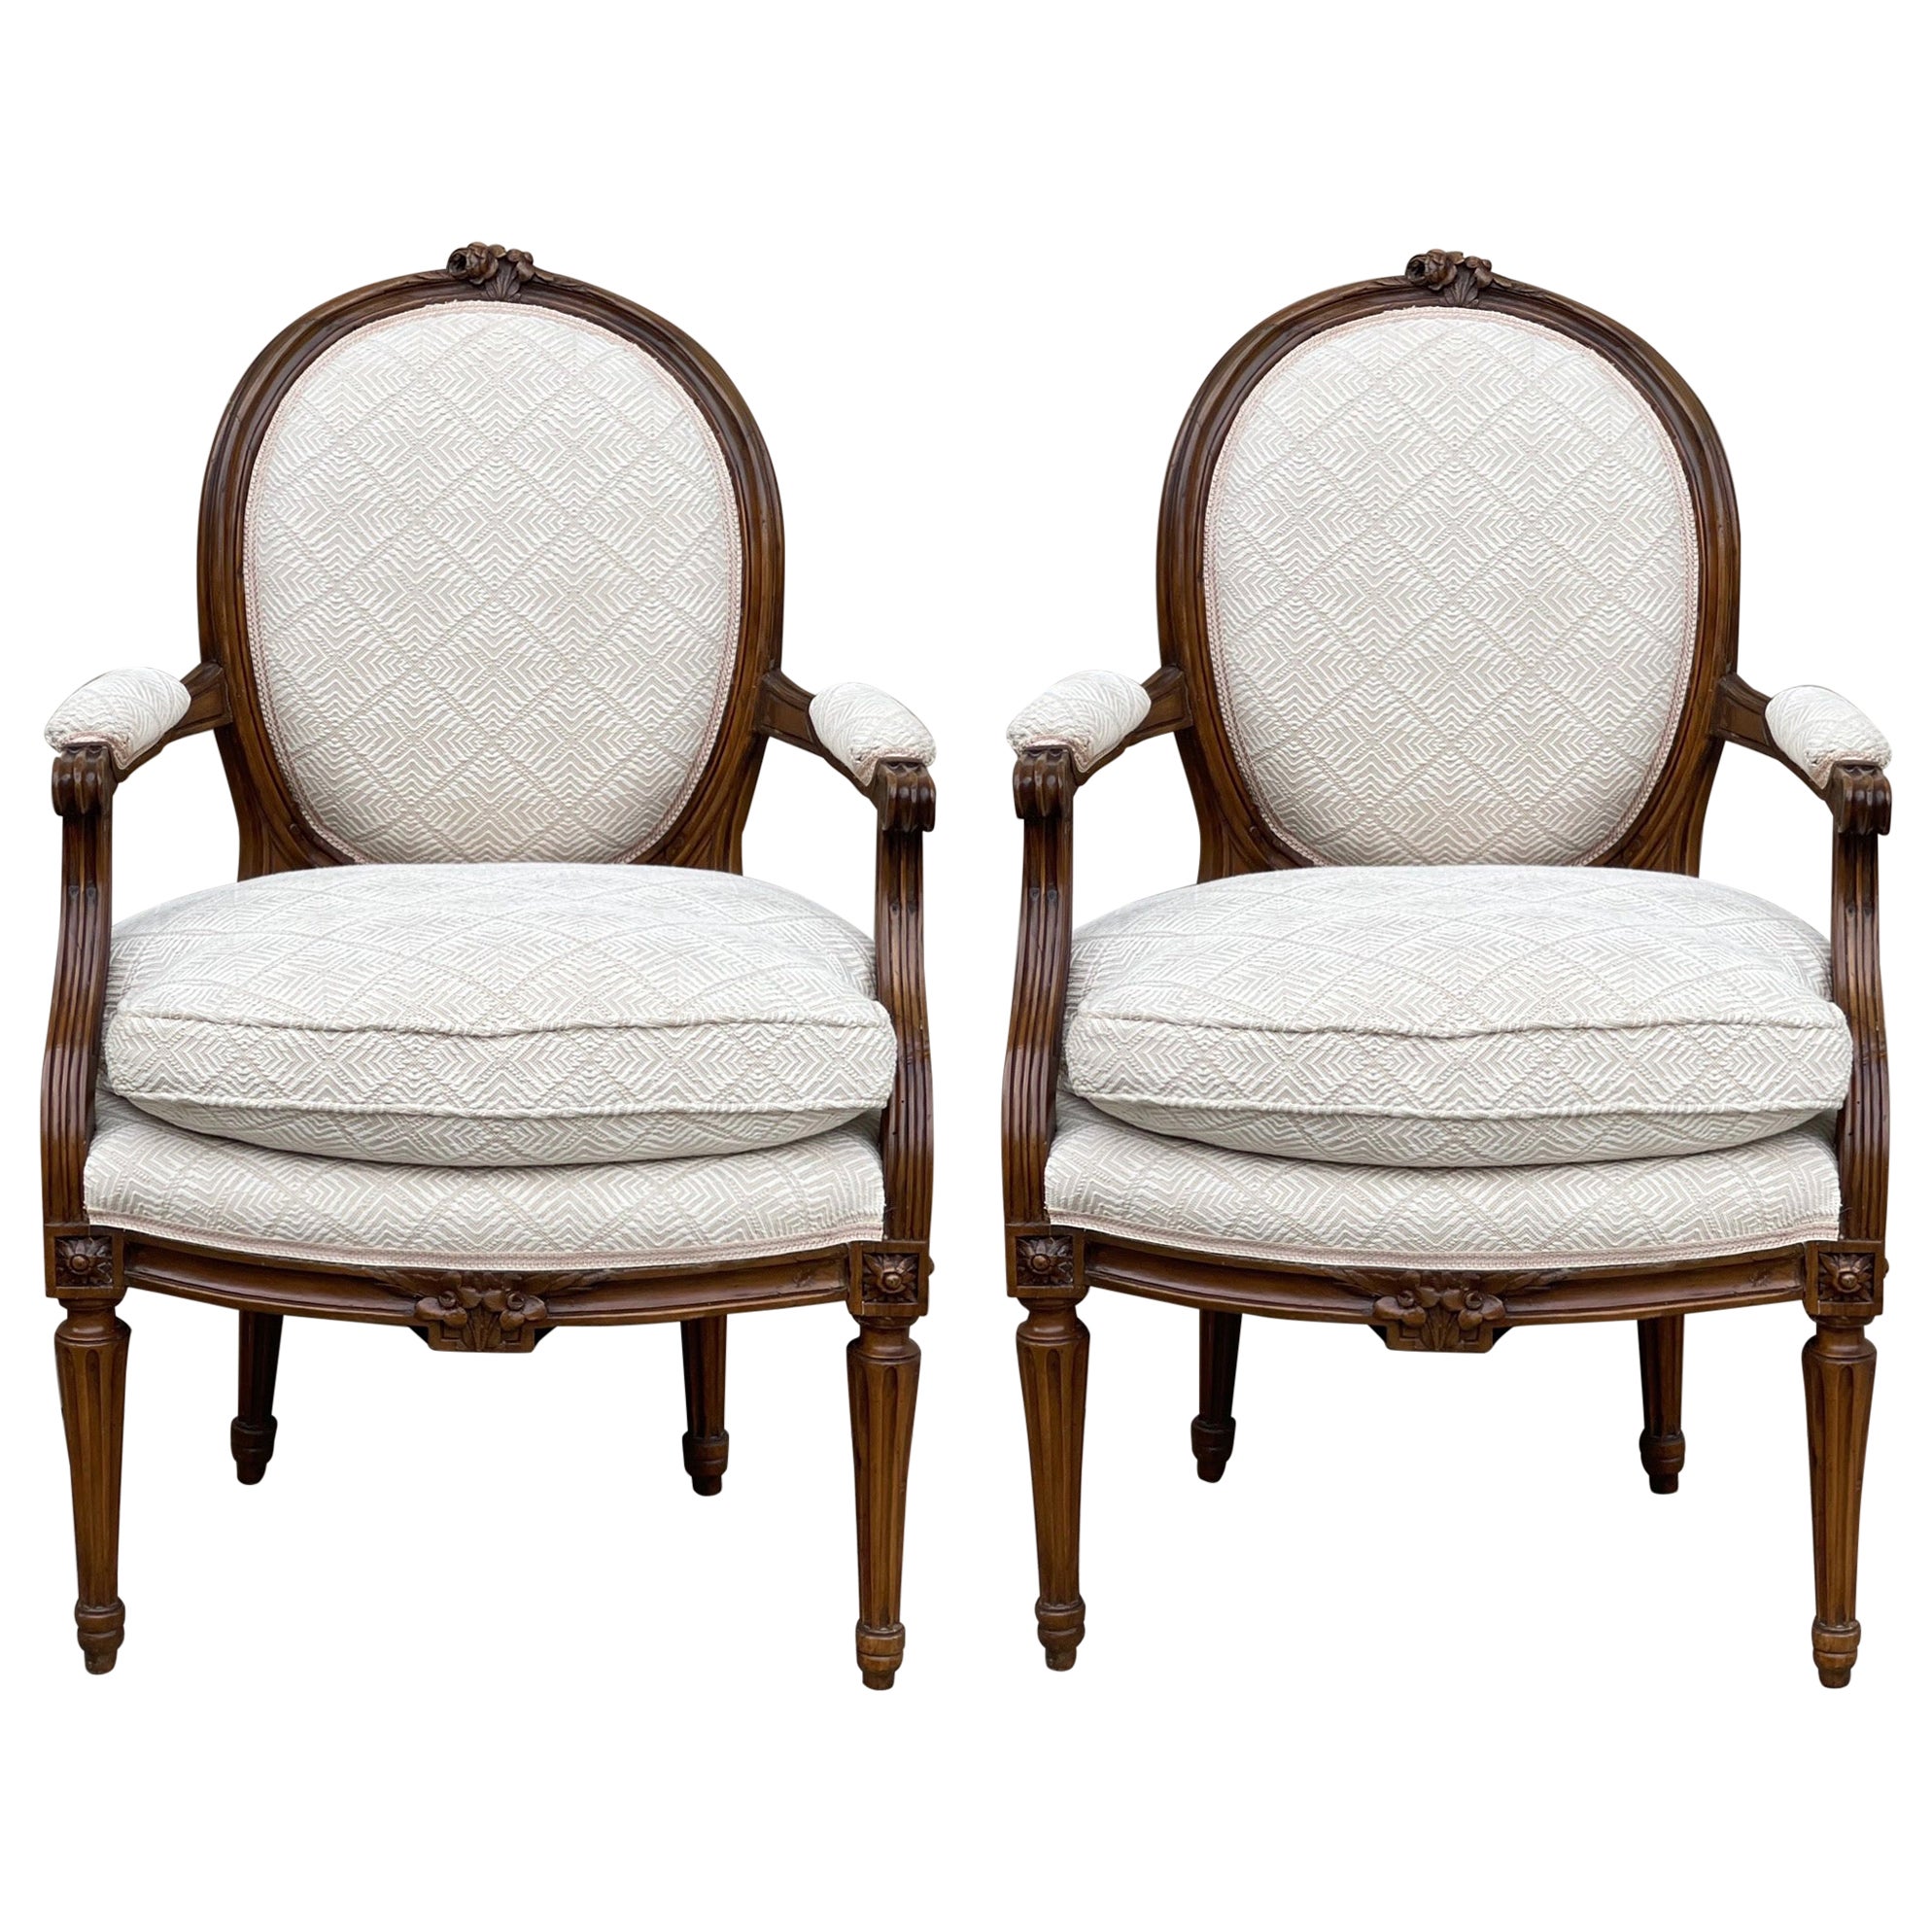 Early 20th-C. Carved Fruitwood French Louis XVI Style Bergere Chairs, Pair